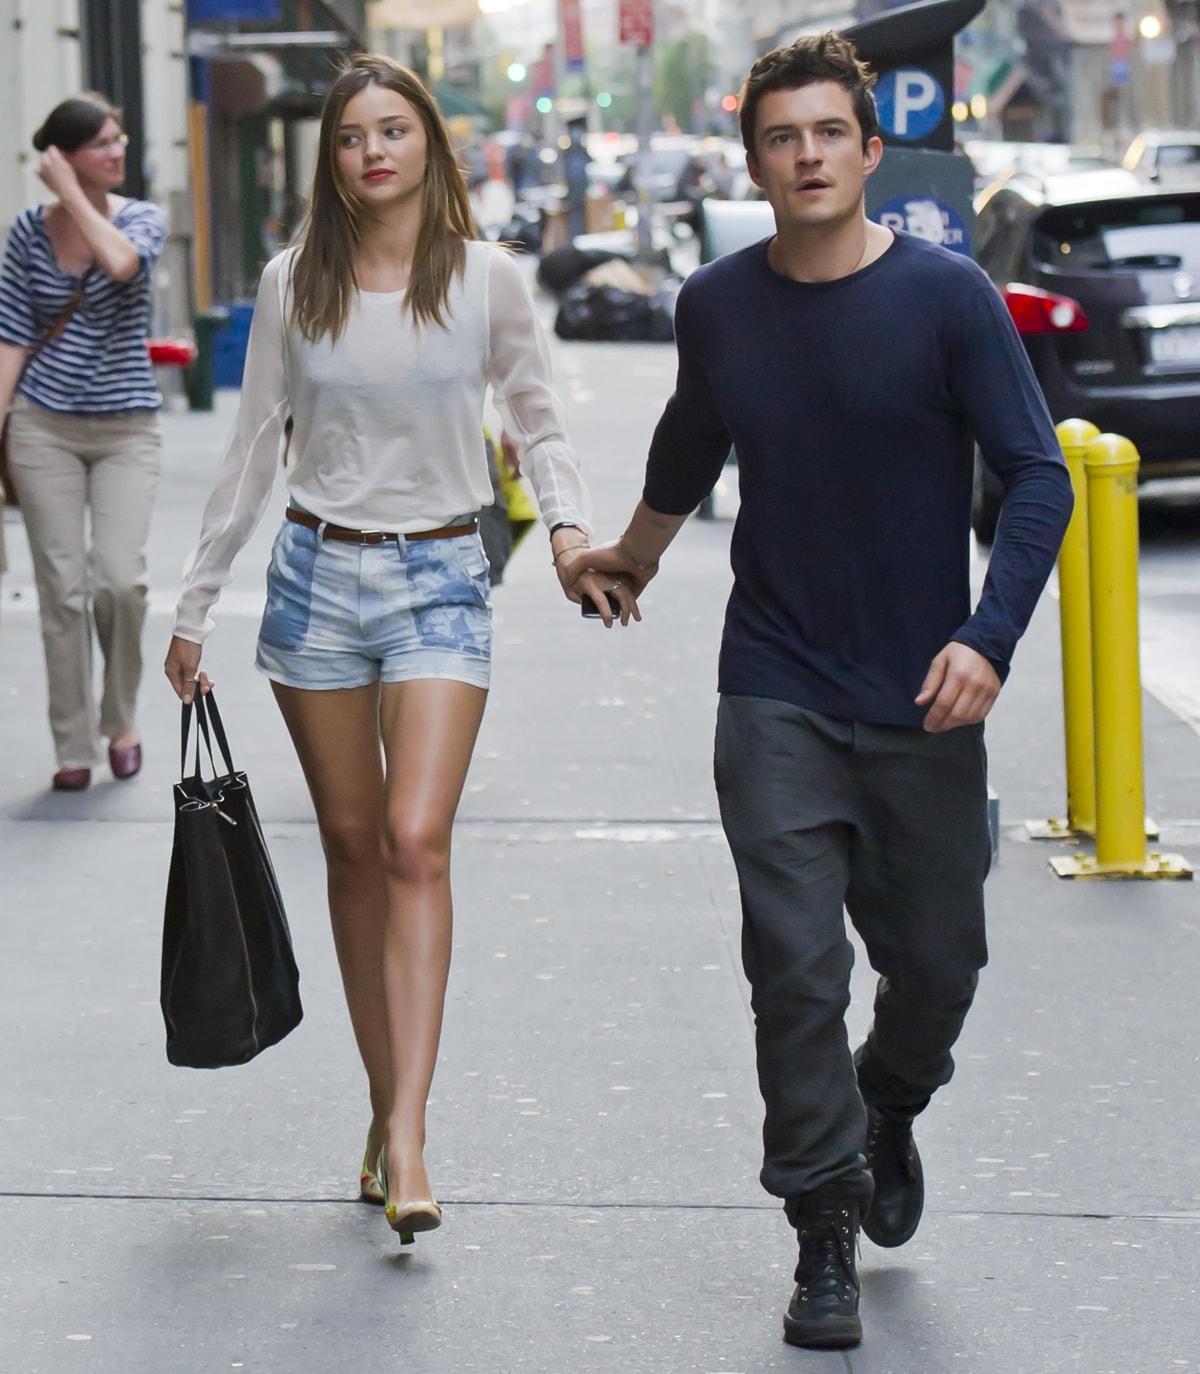 Orlando Bloom and Miranda Kerr split in 2013 after three years of marriage